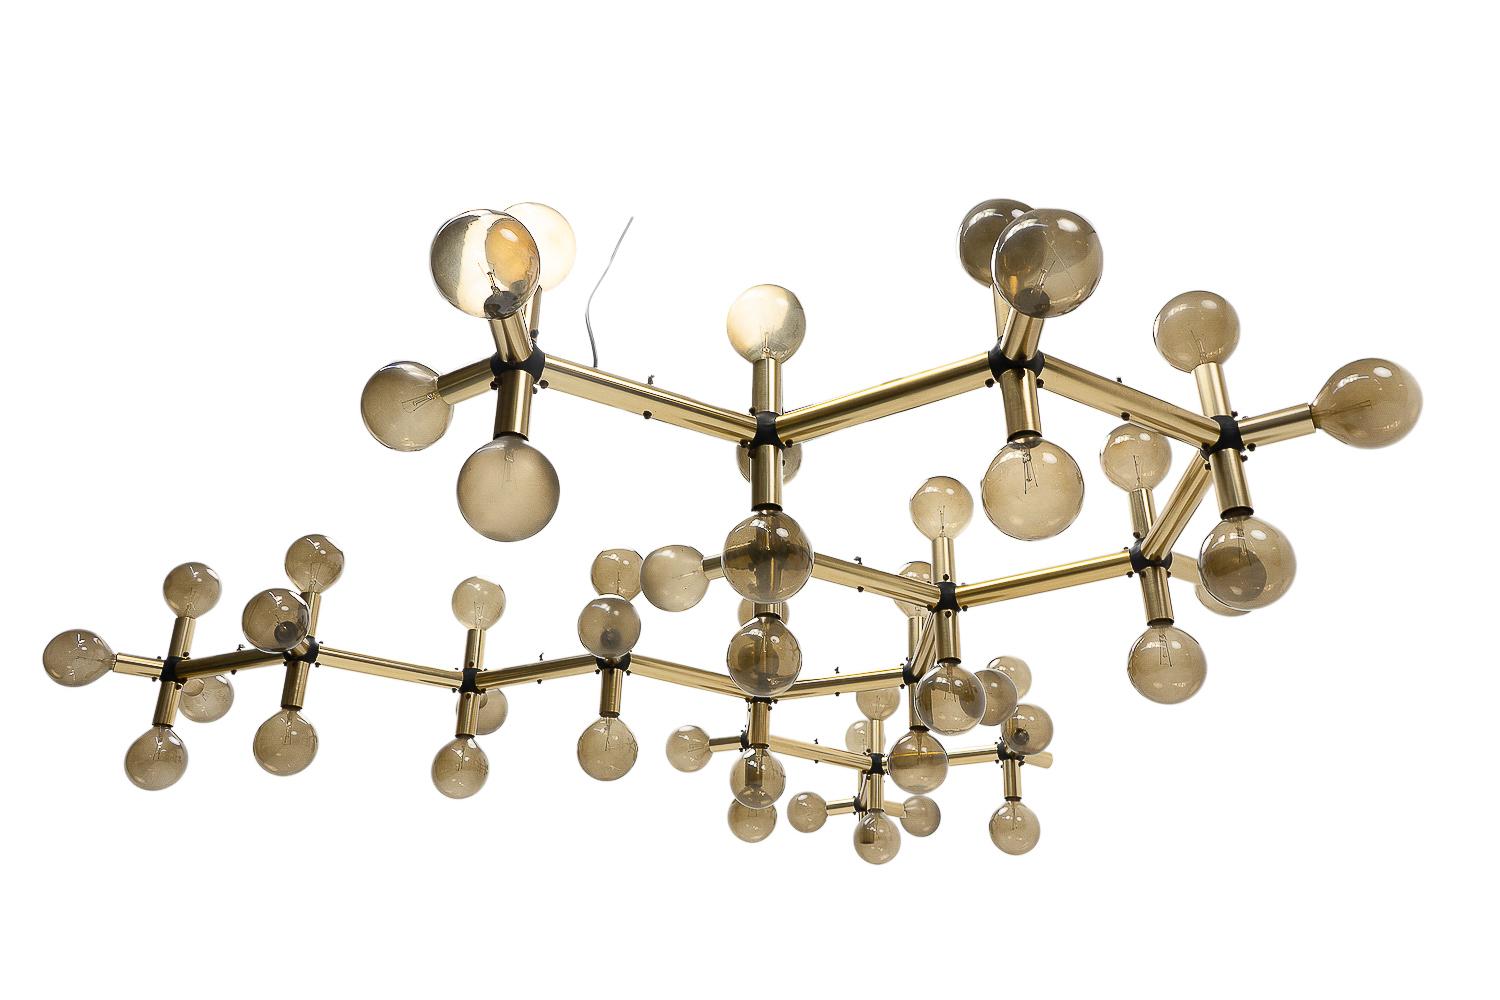 Aluminum Swiss Design Classic Atomic Chandelier by Haussmann for Swisslamps Int, 1960s For Sale